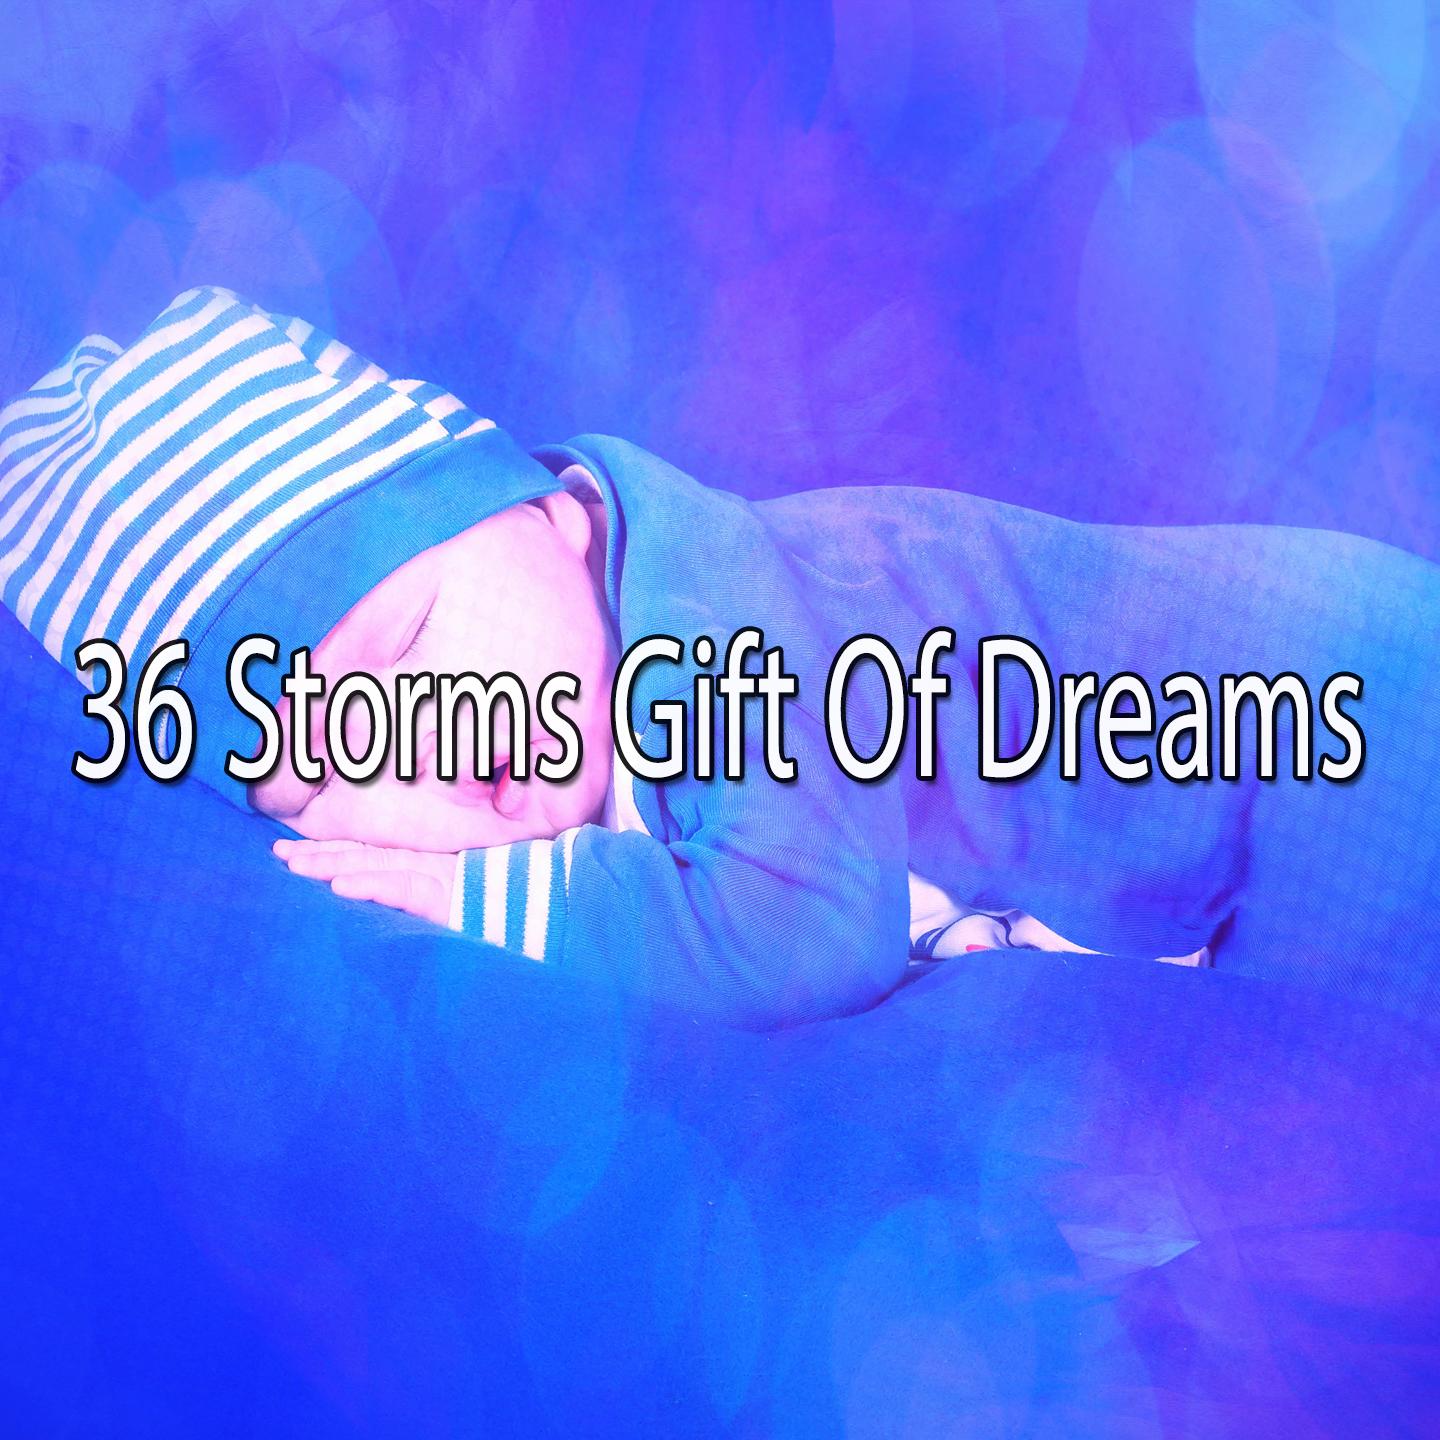 36 Storms Gift of Dreams